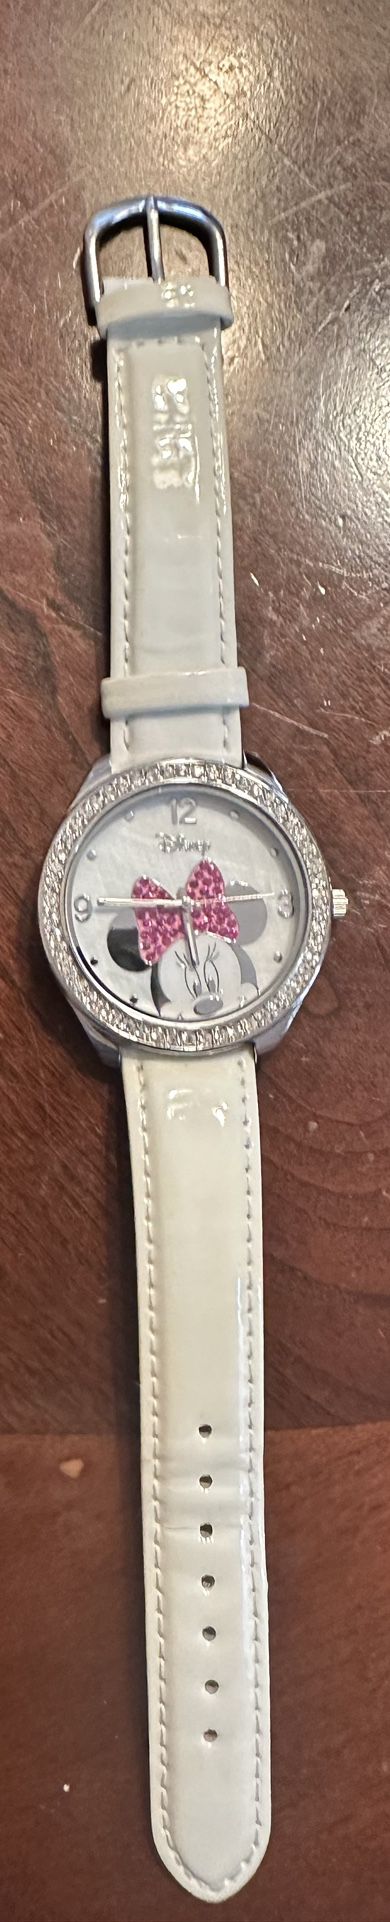 Minnie Mouse Disney Accutime Watch.  New Battery Installed. Very Nice!